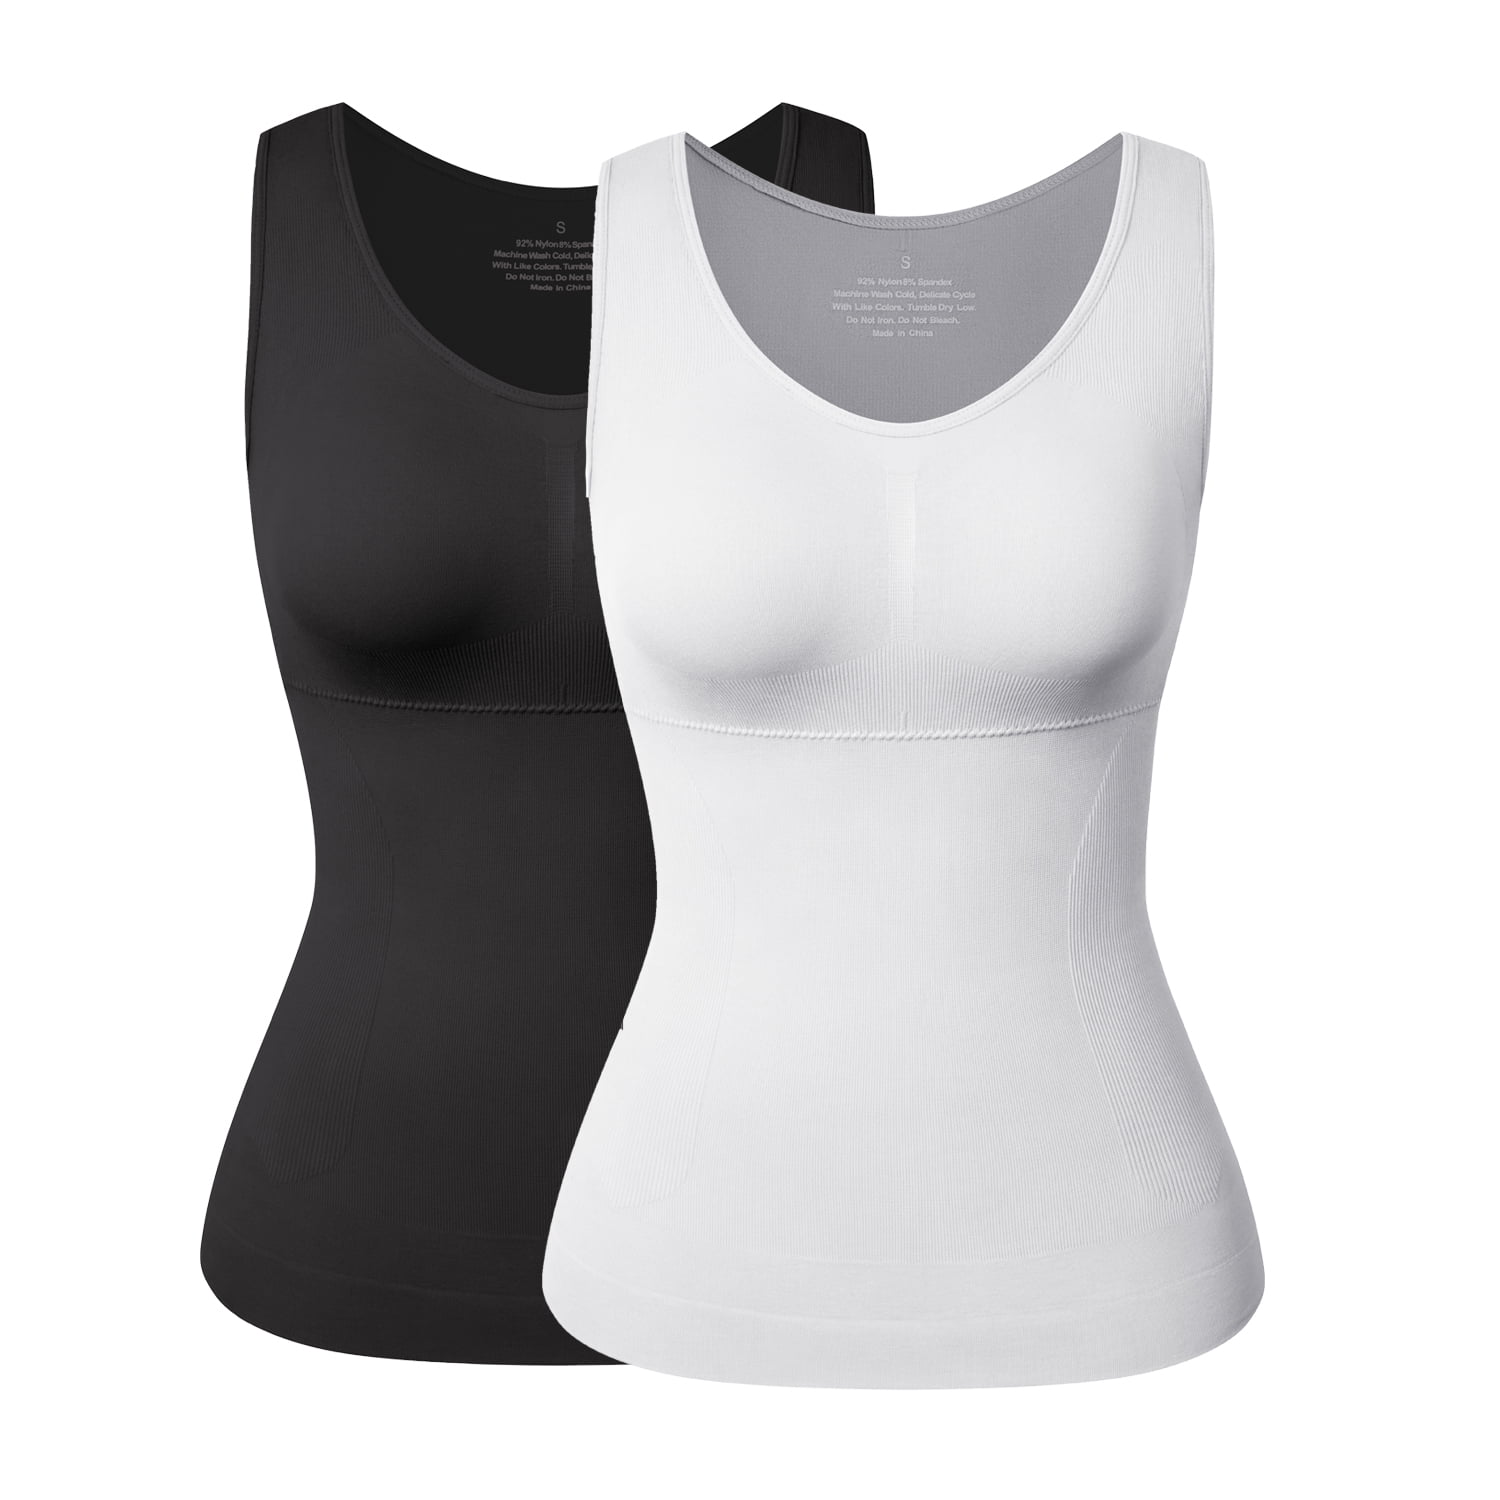 FITVALEN Women Shaper Camisole with Built in Bra Shapewear Tank Top Tummy  Control Camisole Slimming Compression Undershirt 